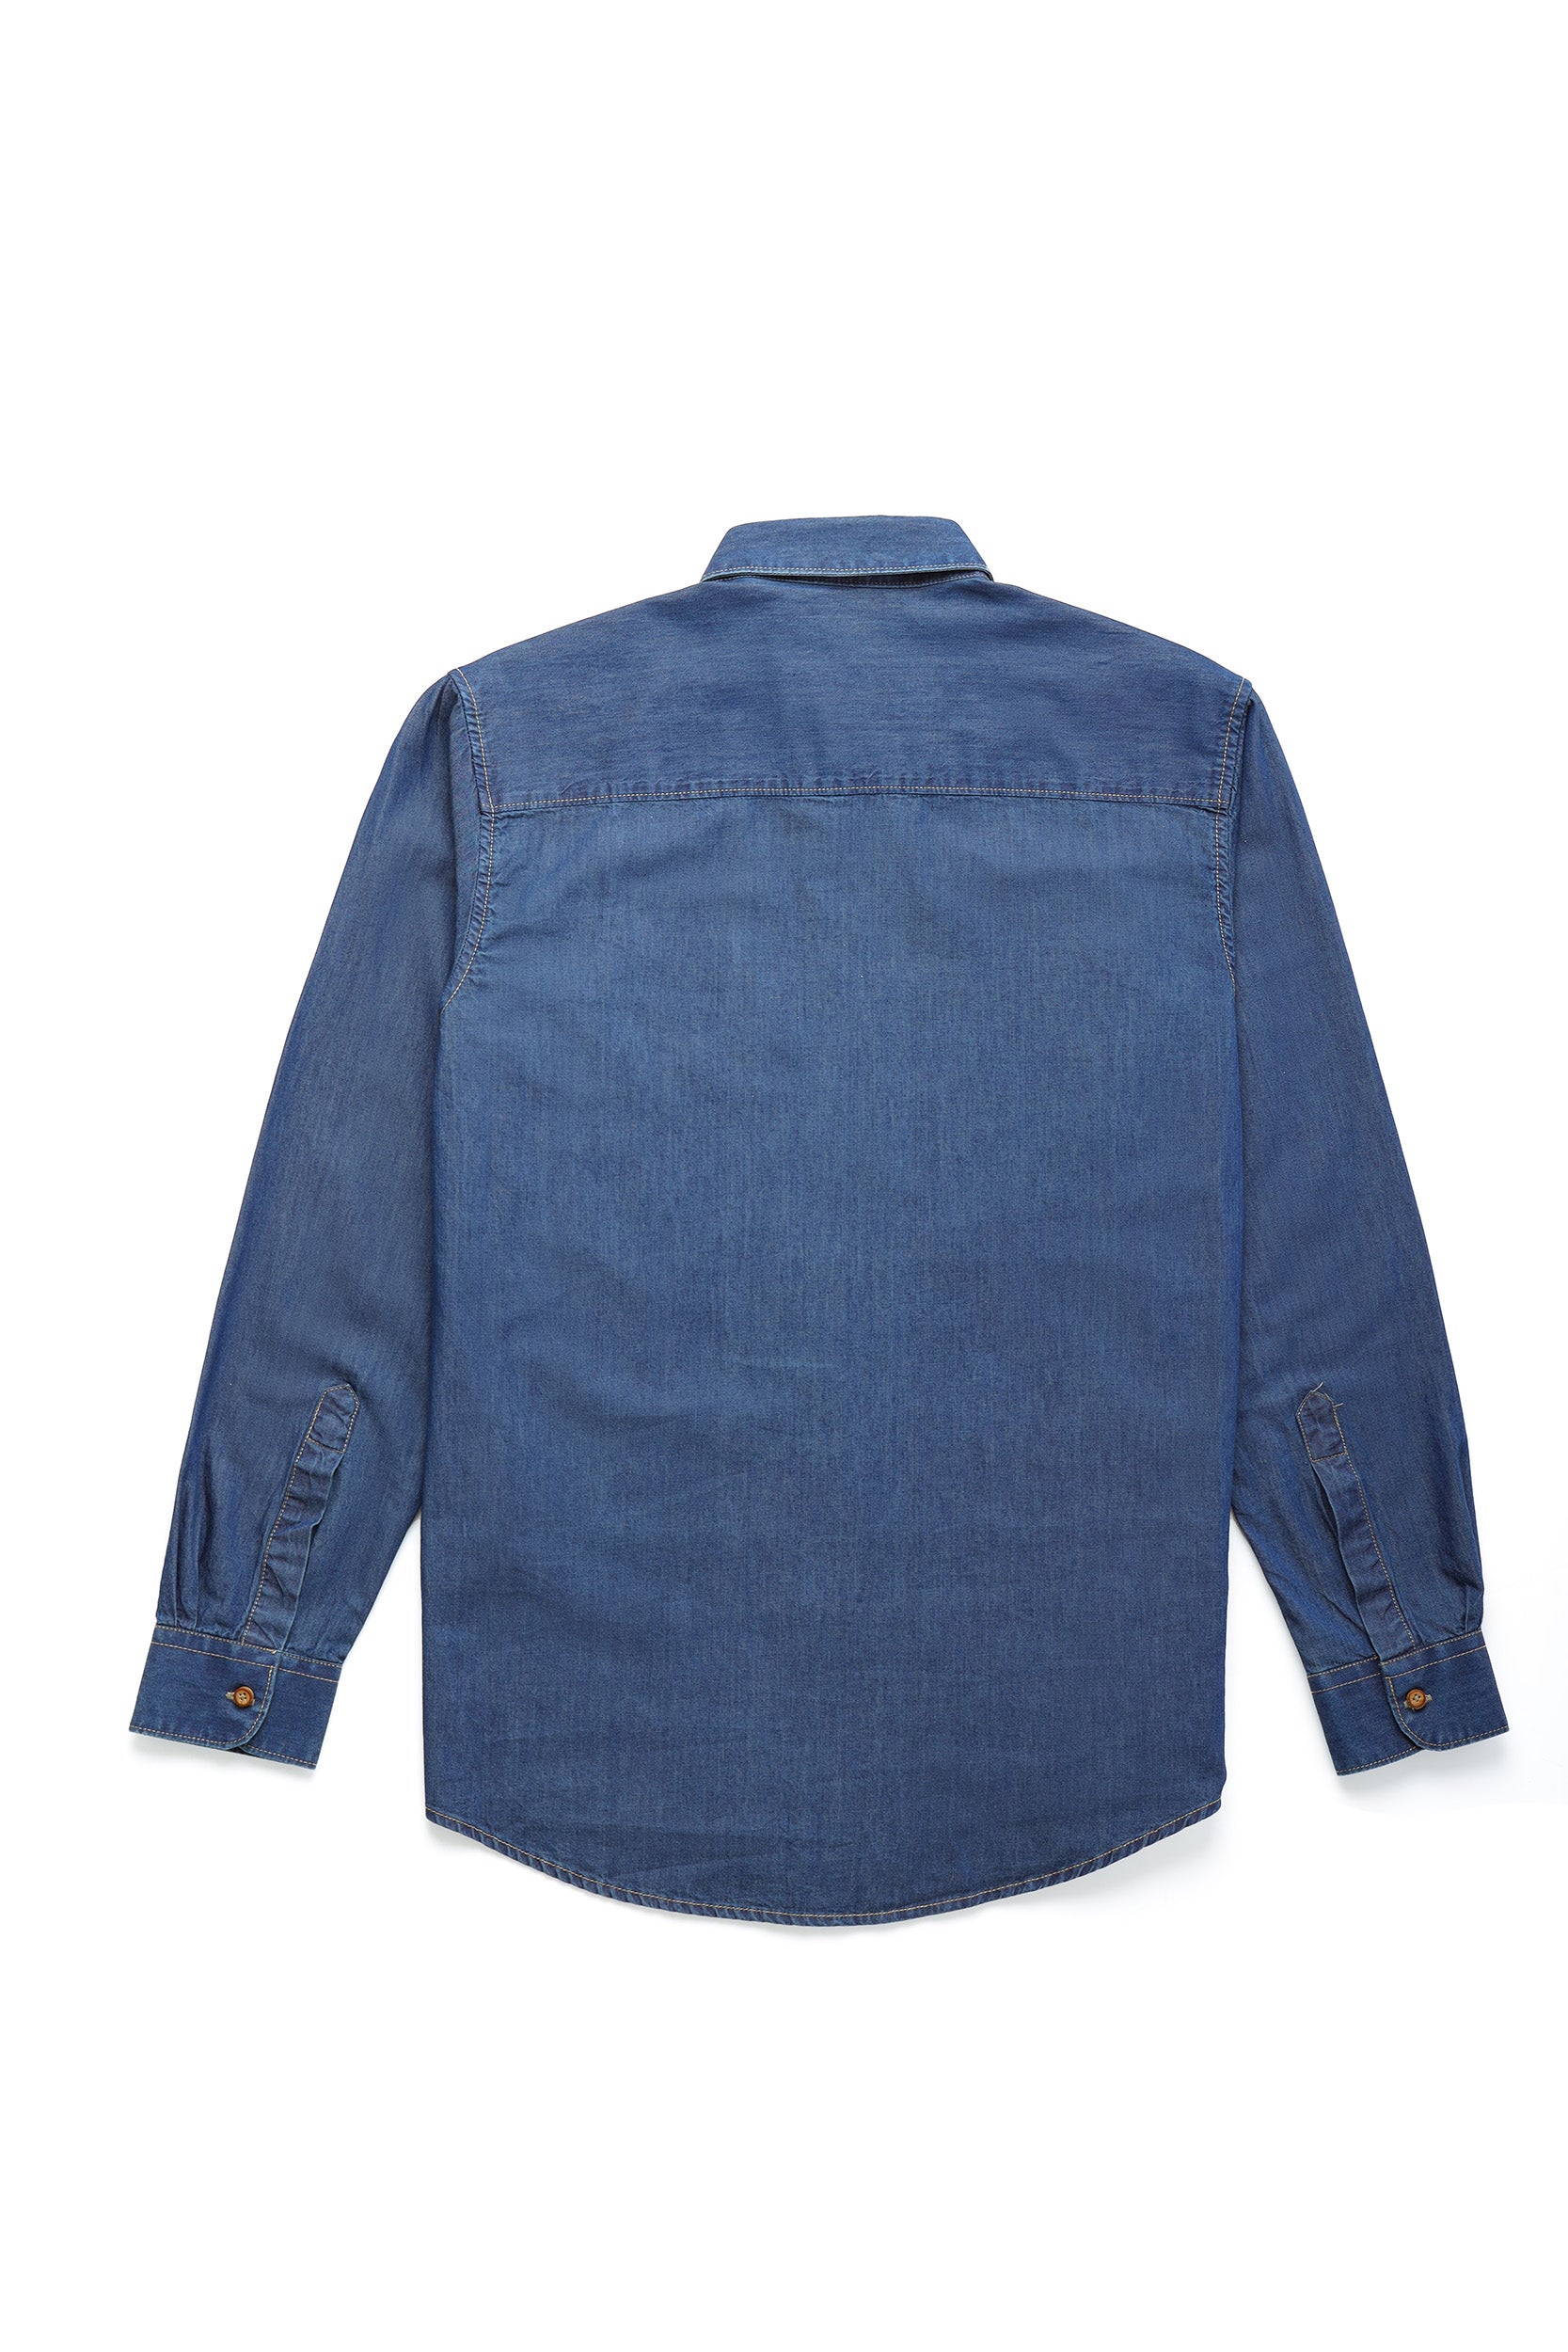 G-STAR RAW Men's 3301 Slim Denim Shirts, Color: Blue (Rinsed-D013-082),  Size: XXL : Buy Online at Best Price in KSA - Souq is now Amazon.sa: Fashion